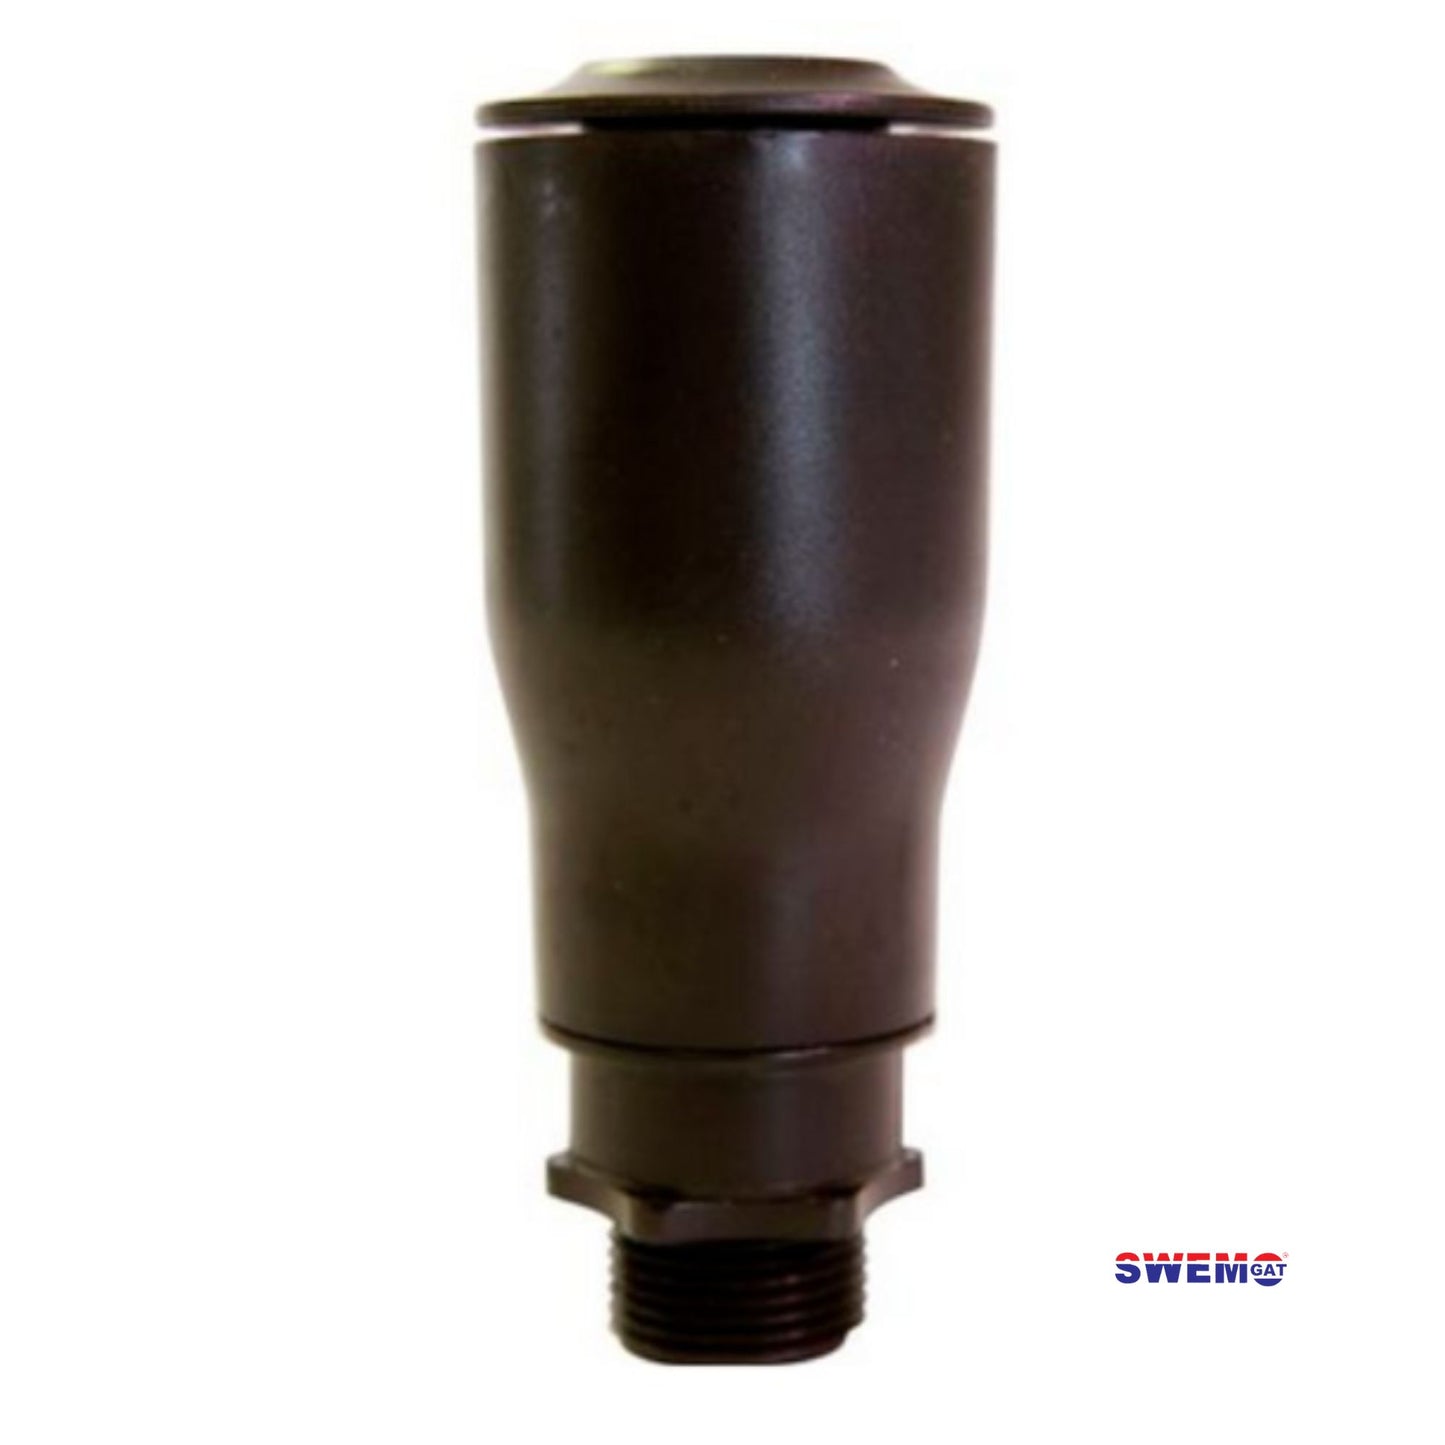 Foam Jet Nozzle - Made in plastic, ideal for home pools and ponds